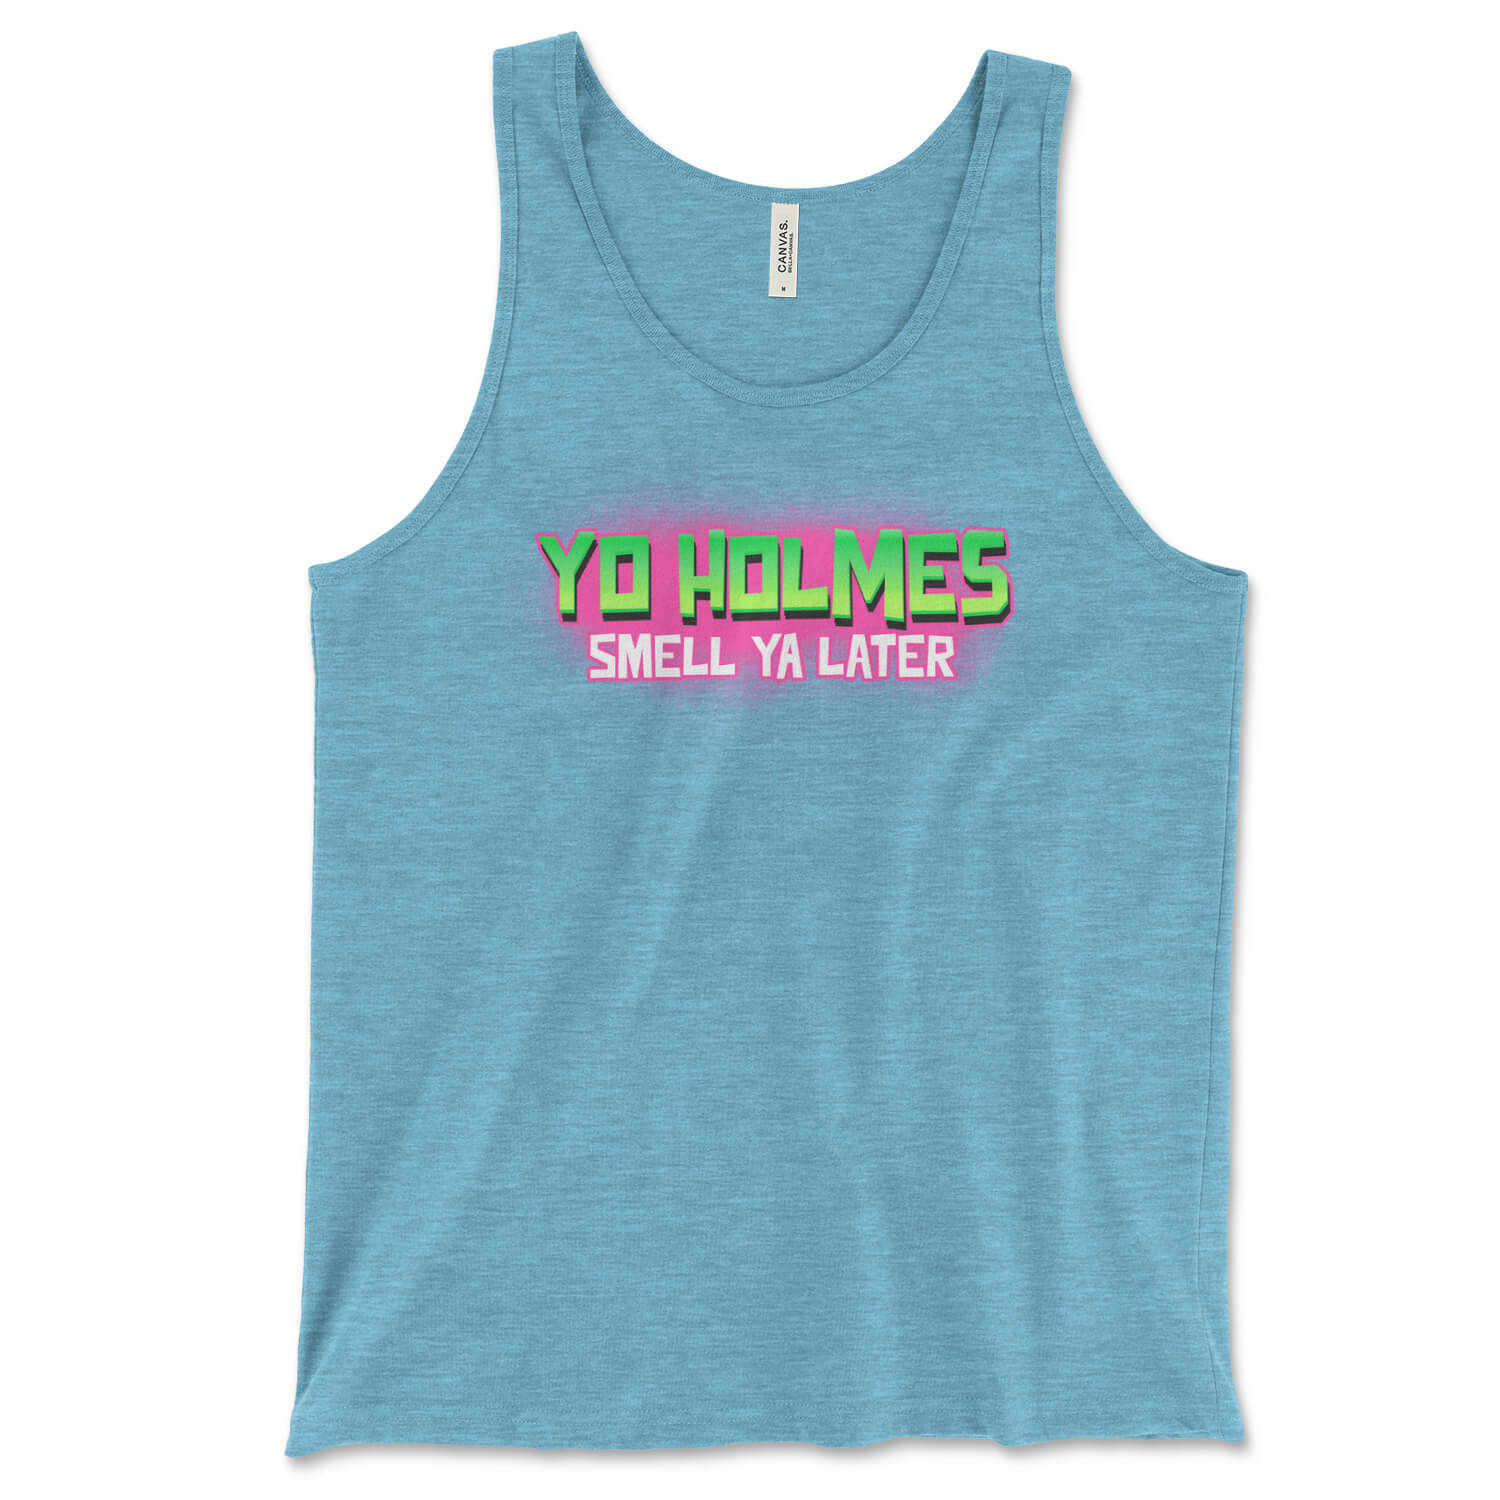 Fresh Prince of Bel-Air Yo Holmes Smell Ya Later aqua triblend tank top from Phillygoat